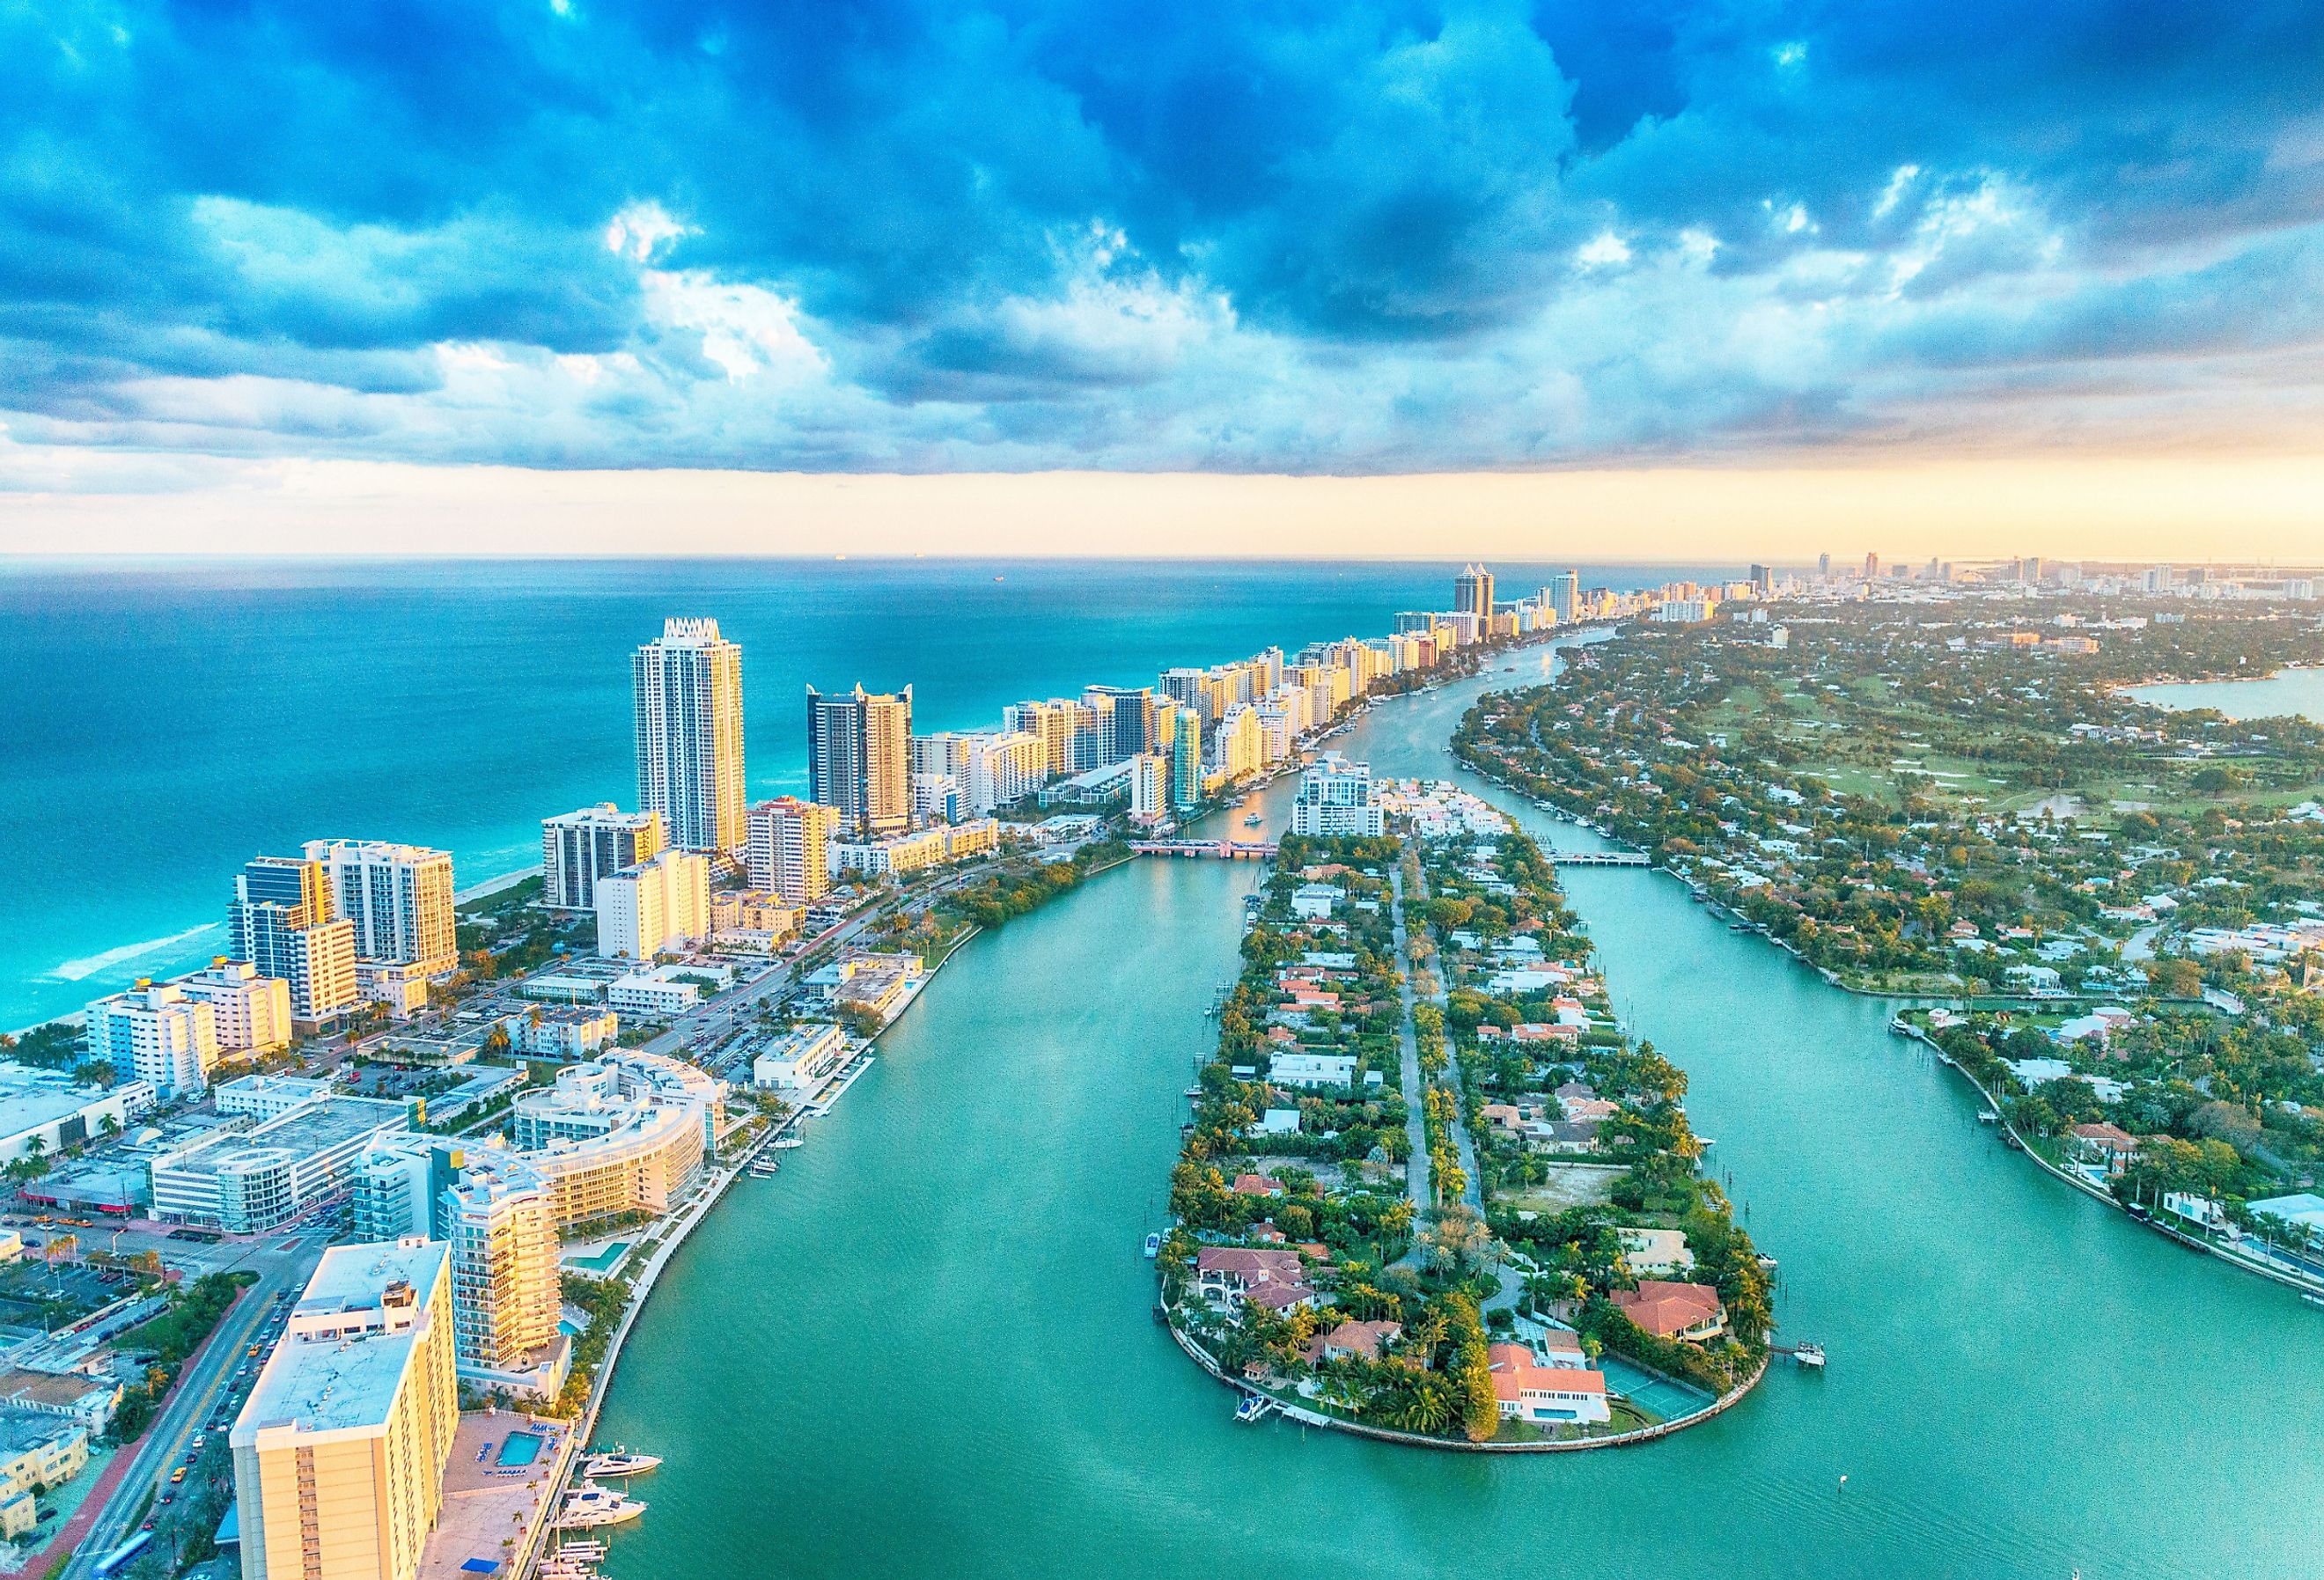 places to visit between orlando and miami